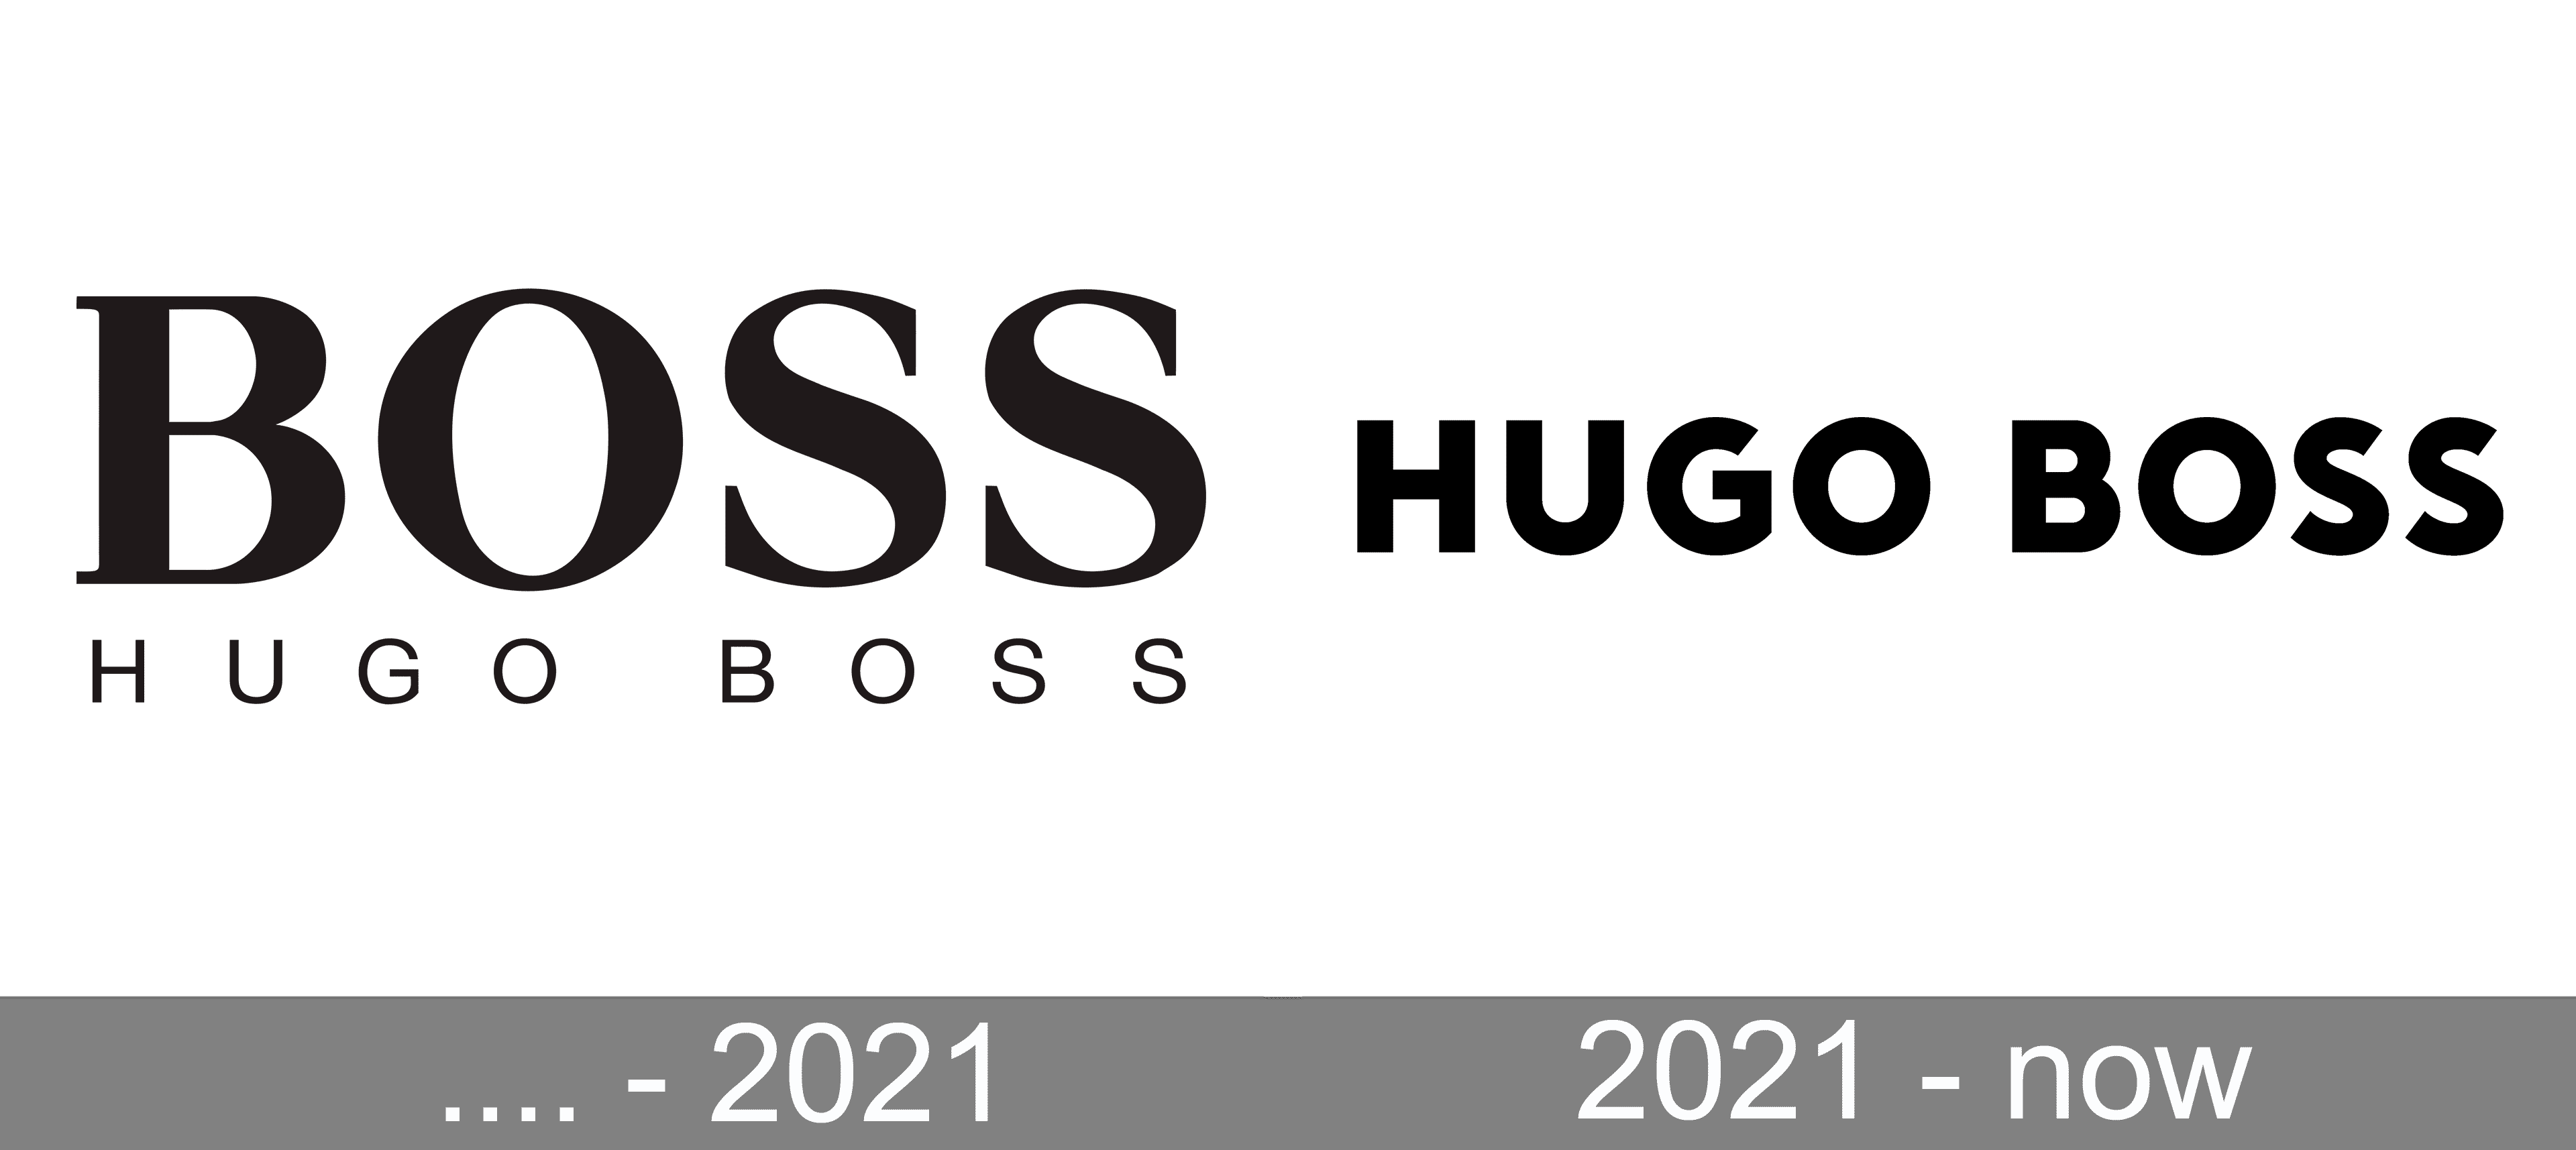 Hugo Boss logo and symbol, meaning, PNG